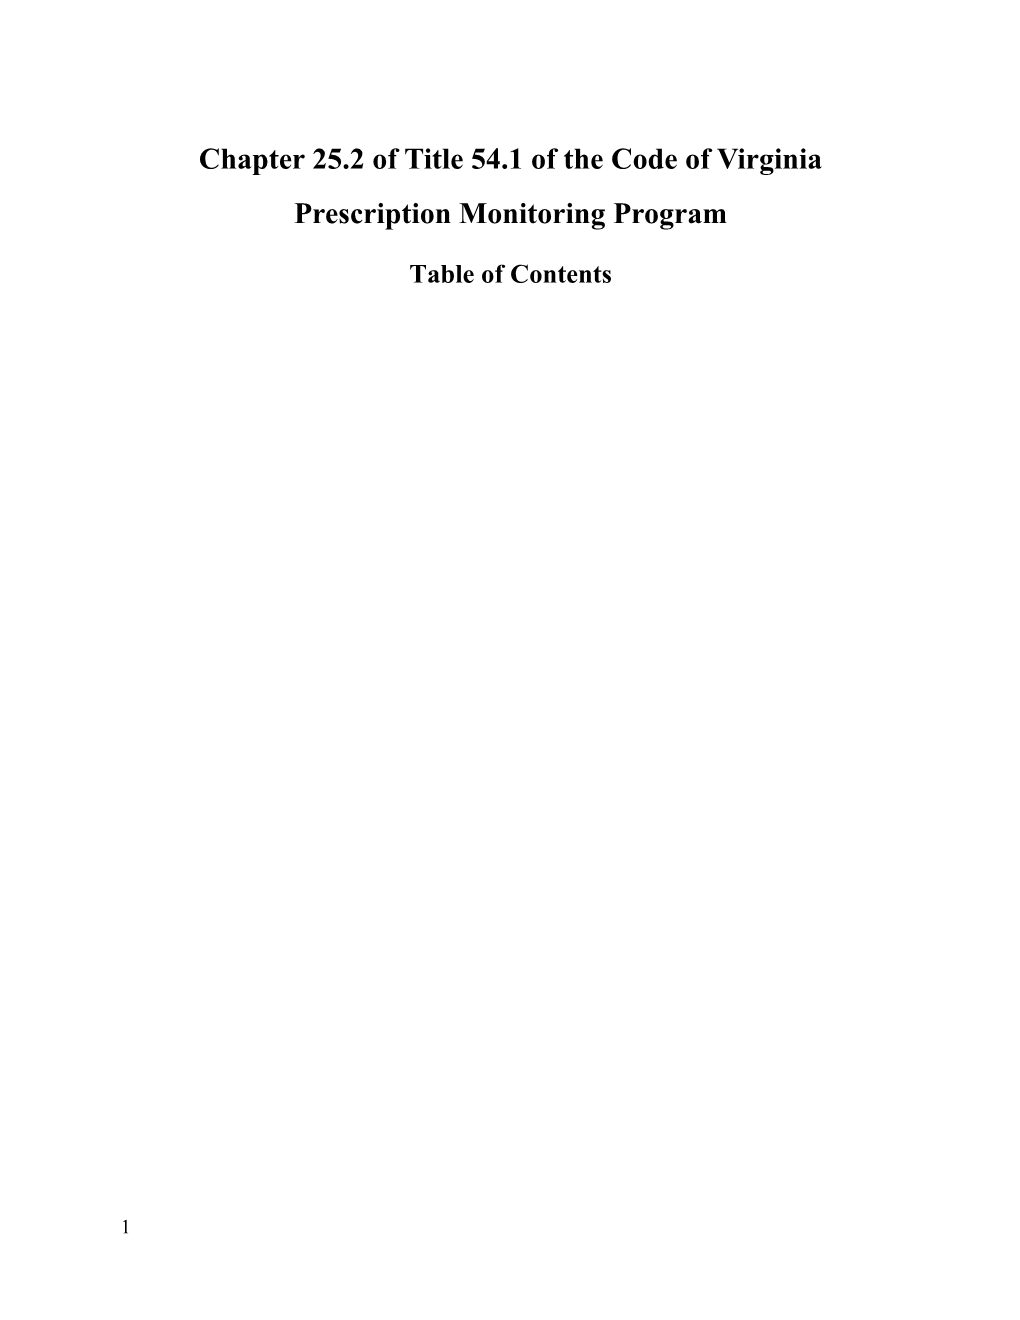 Chapter 25.2 of Title 54.1 of the Code of Virginia